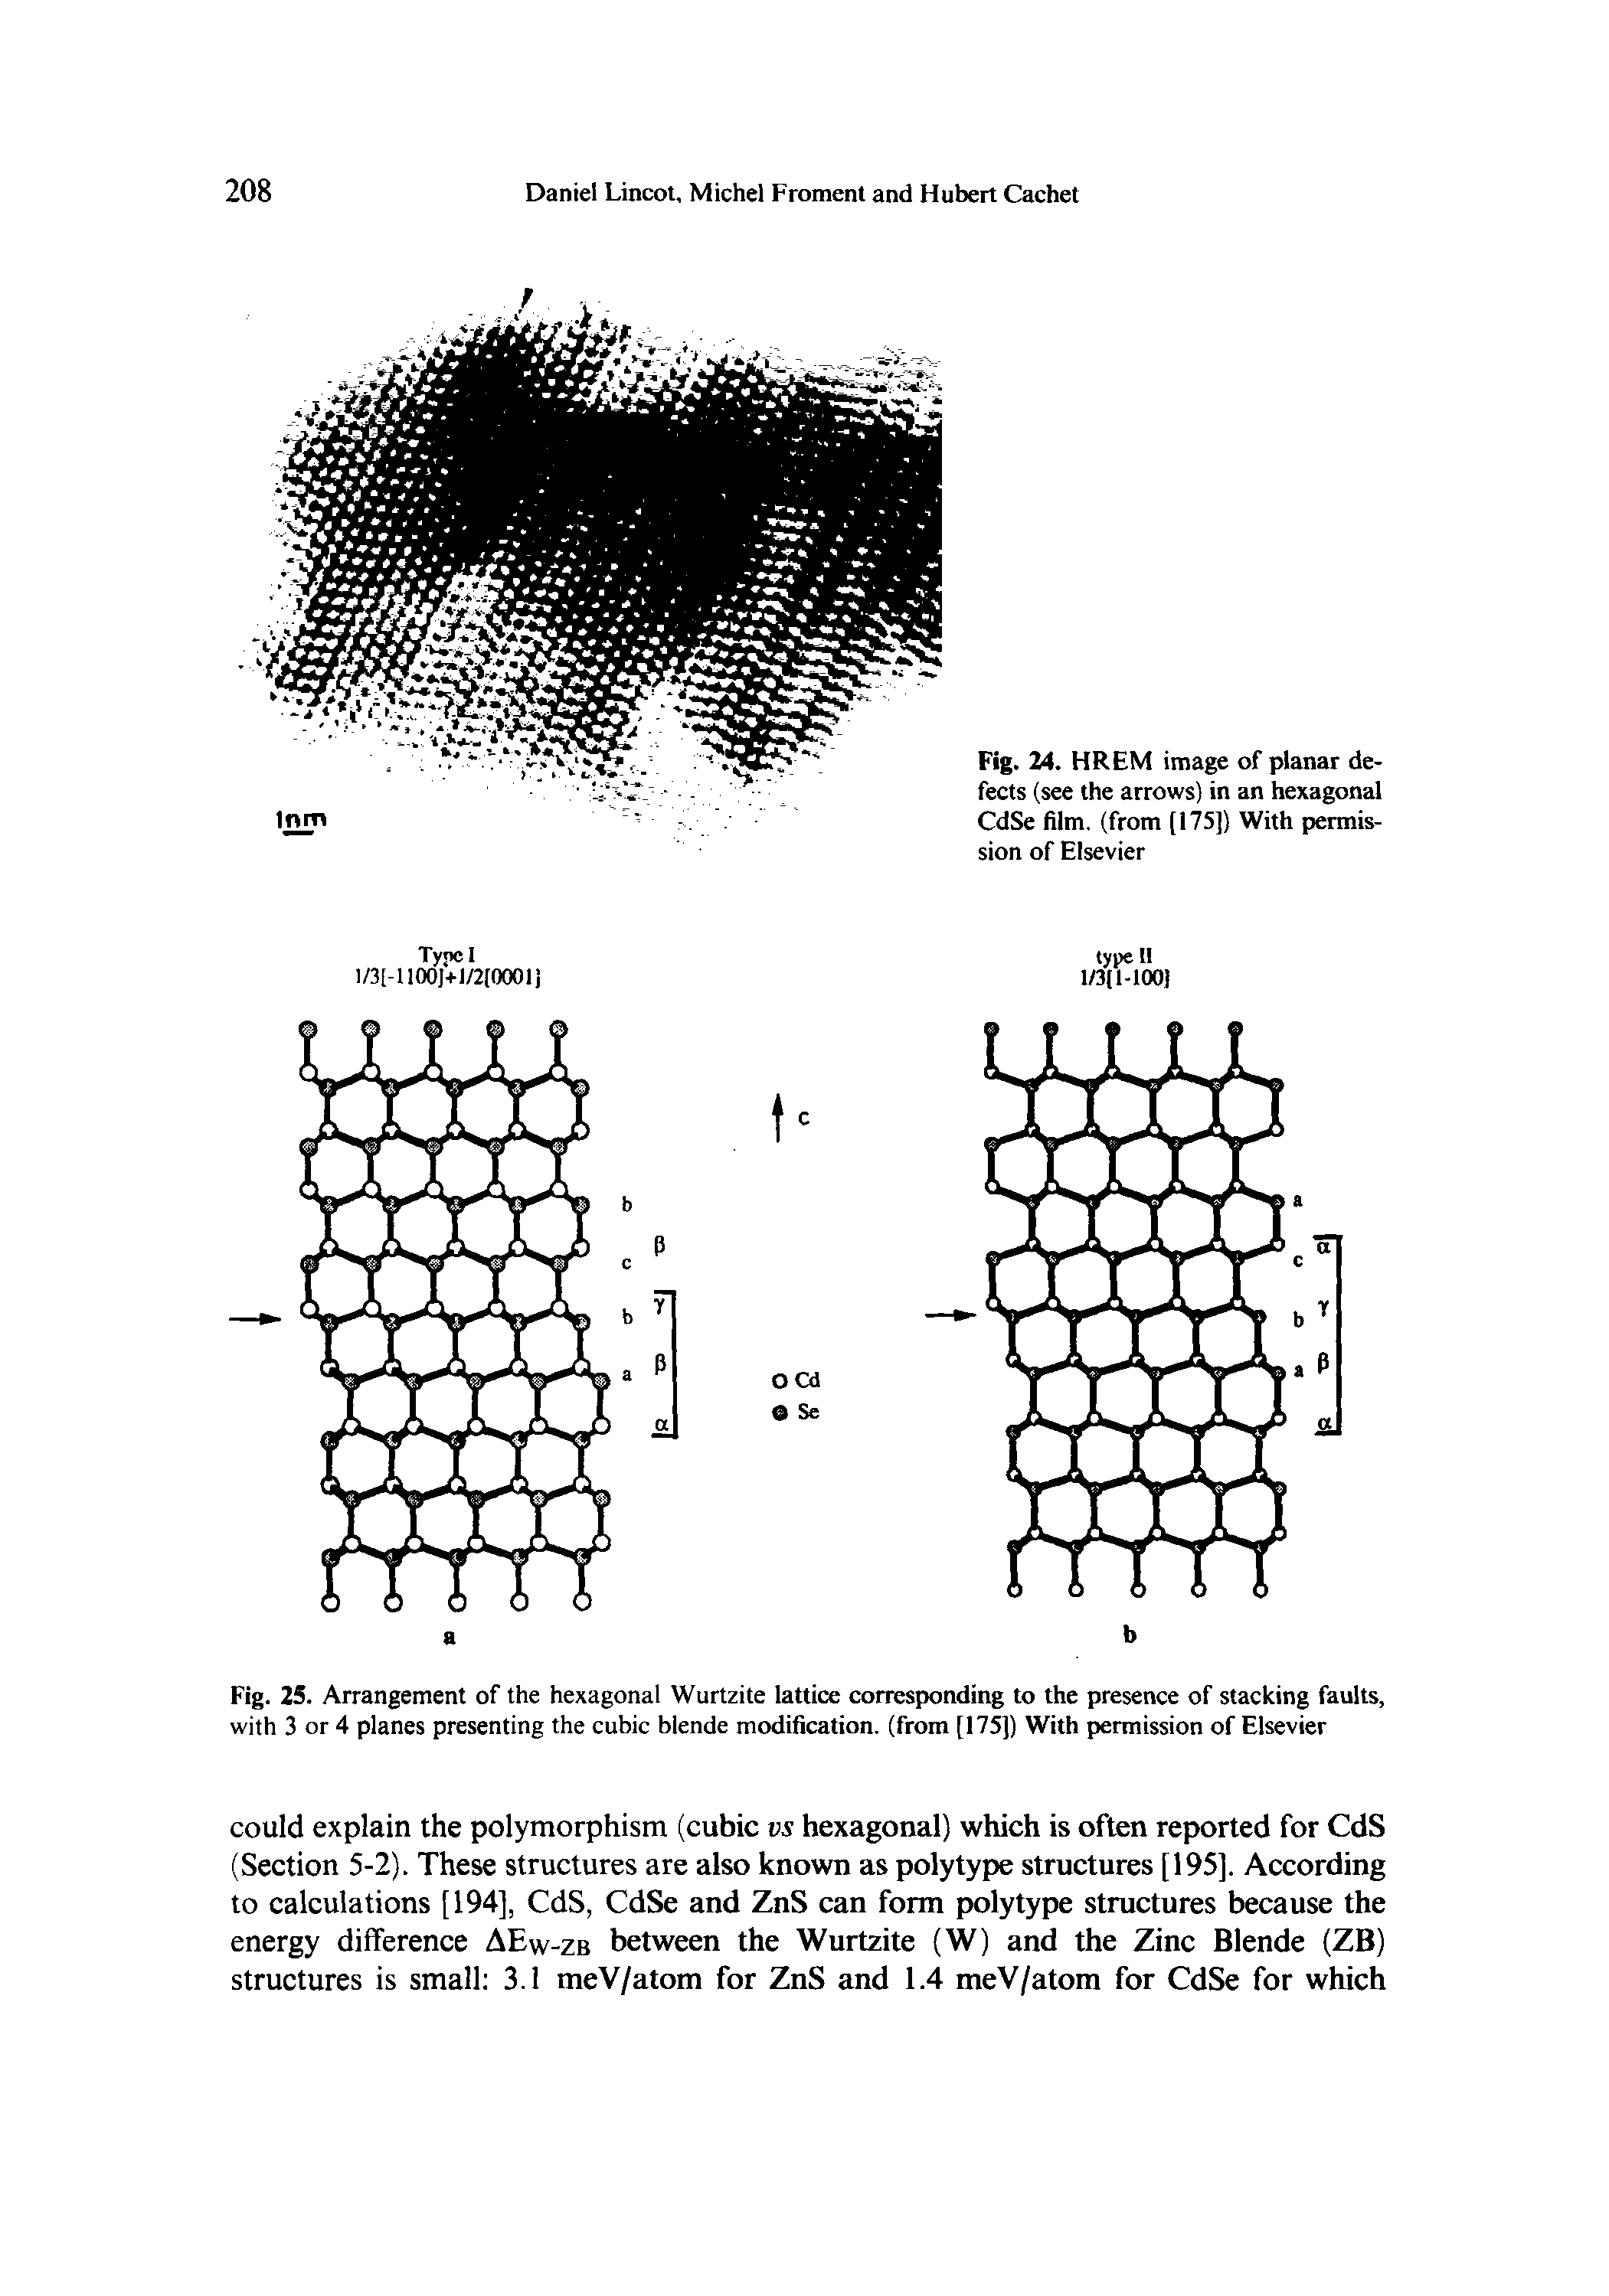 Fig. 25. Arrangement of the hexagonal Wurtzite lattice corresponding to the presence of stacking faults, with 3 or 4 planes presenting the cubic blende modification, (from [175]) With permission of Elsevier...